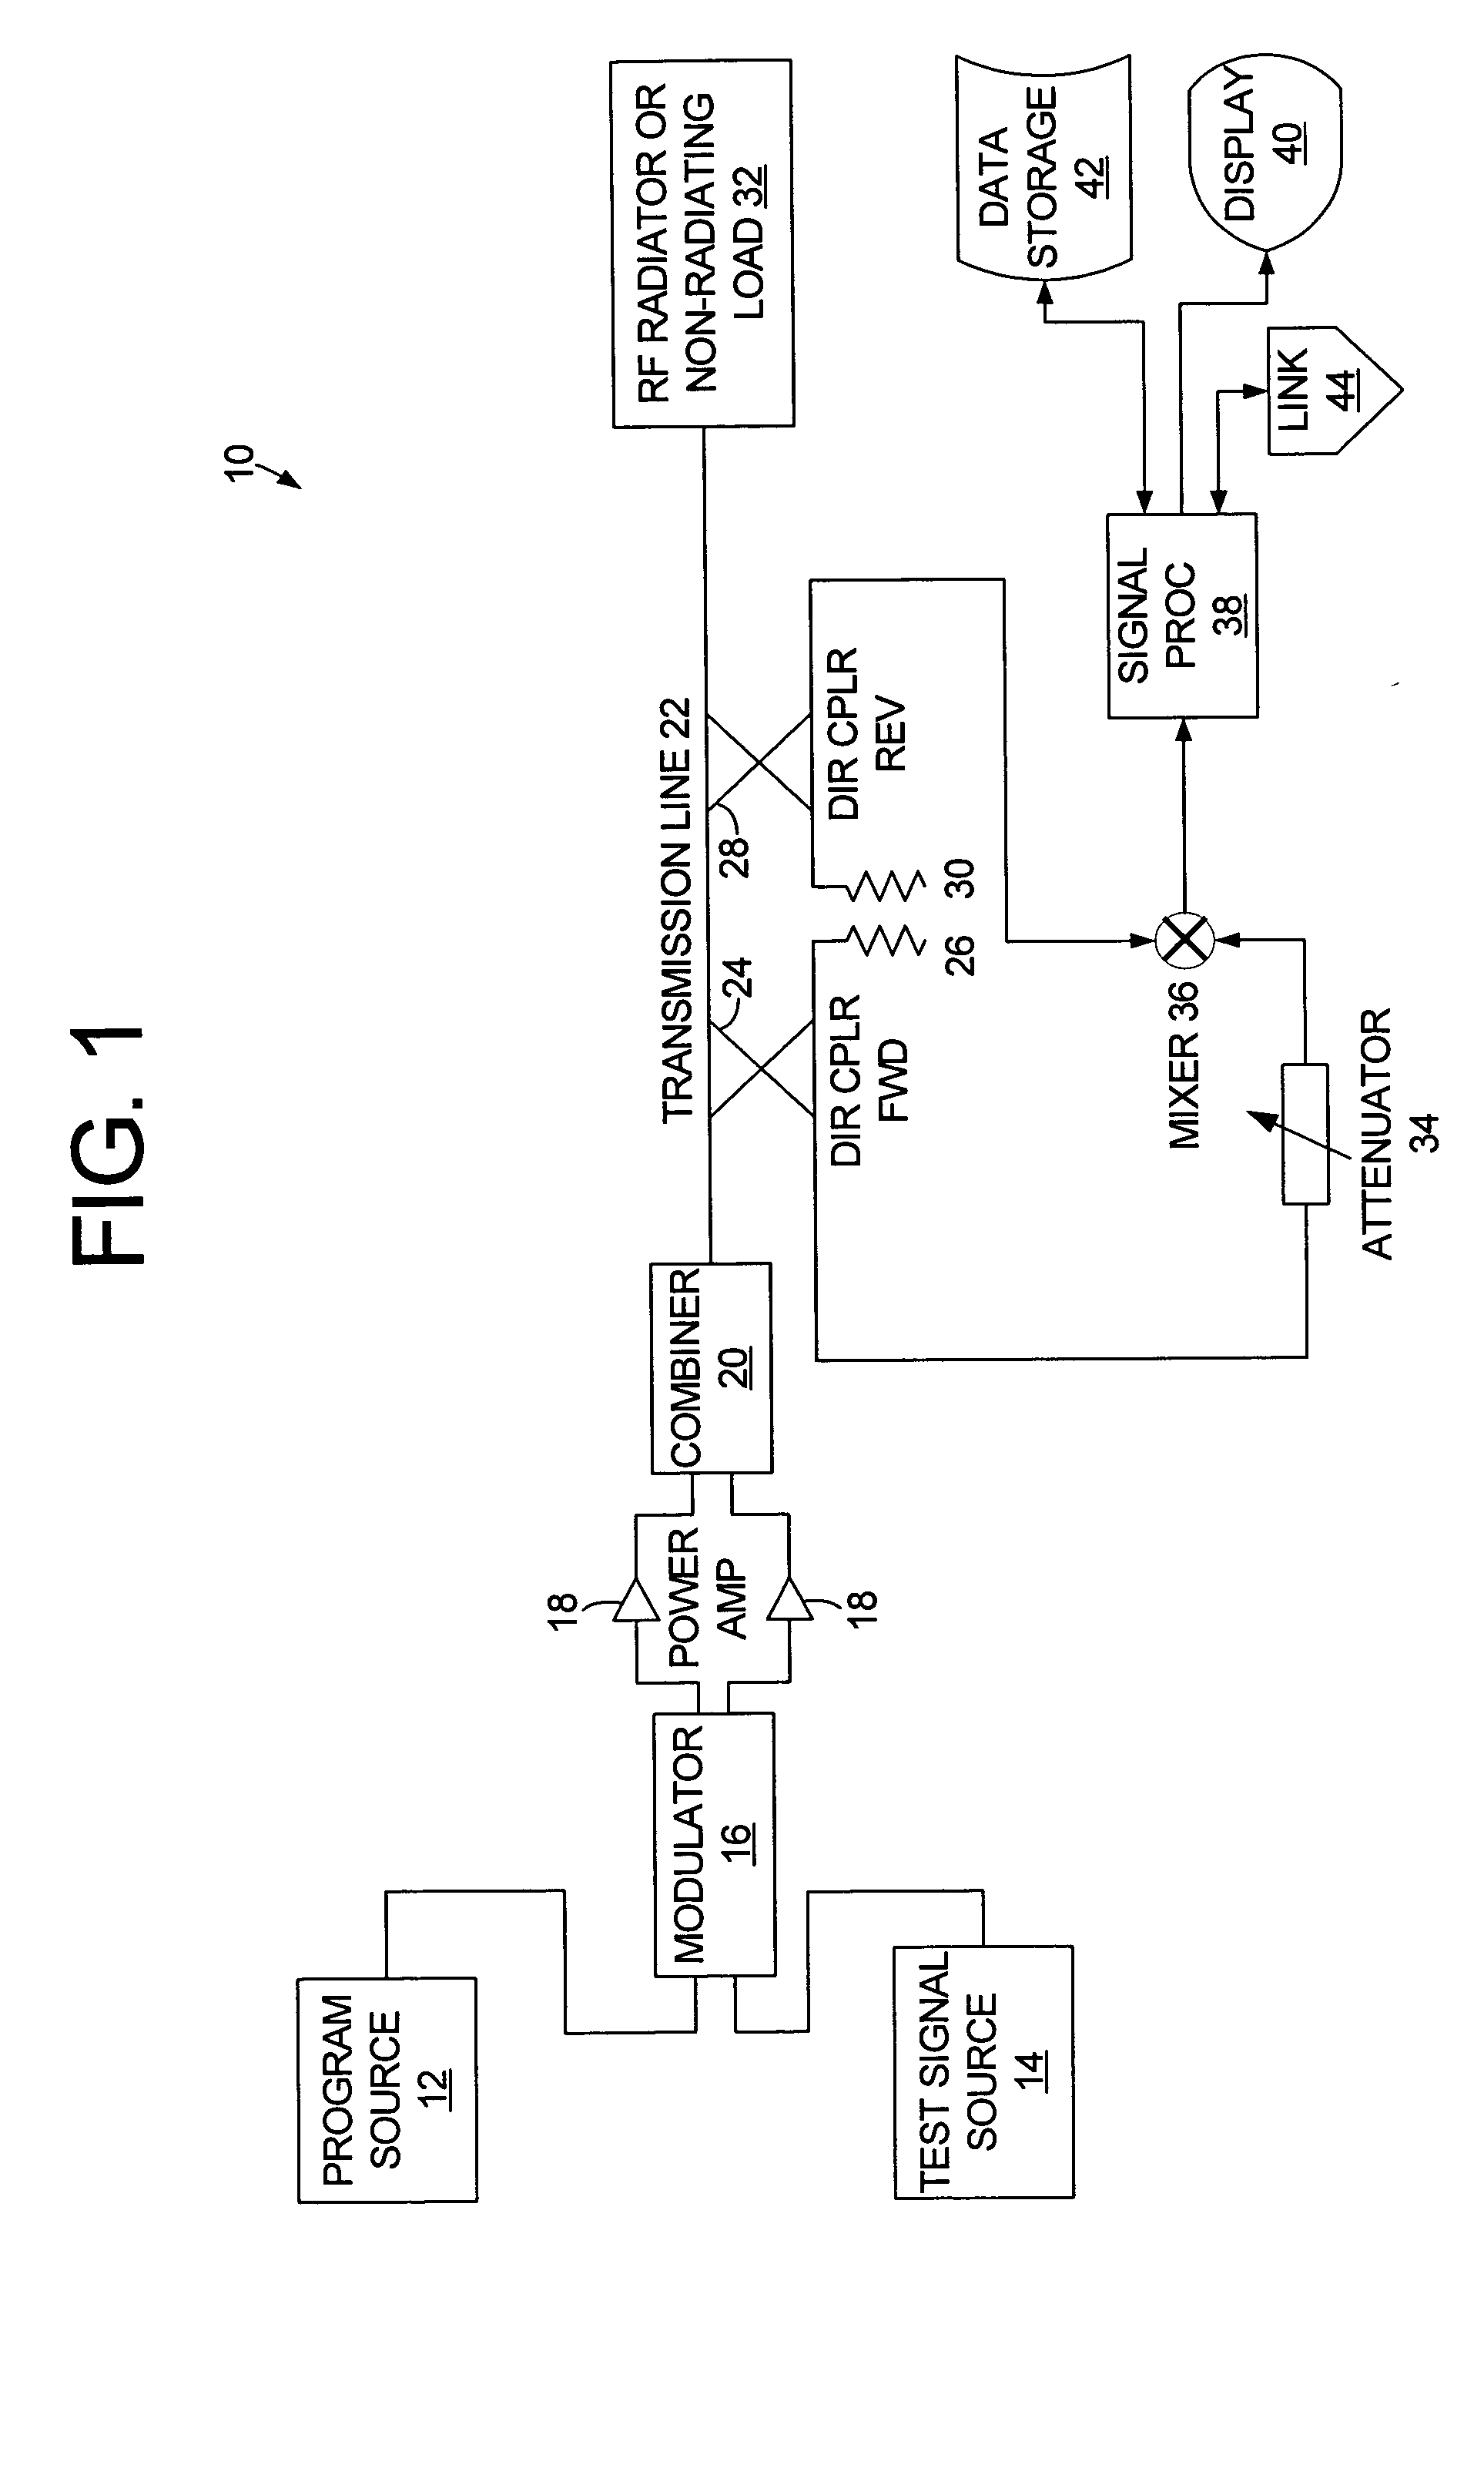 Apparatus and method for monitoring transmission systems using embedded test signals